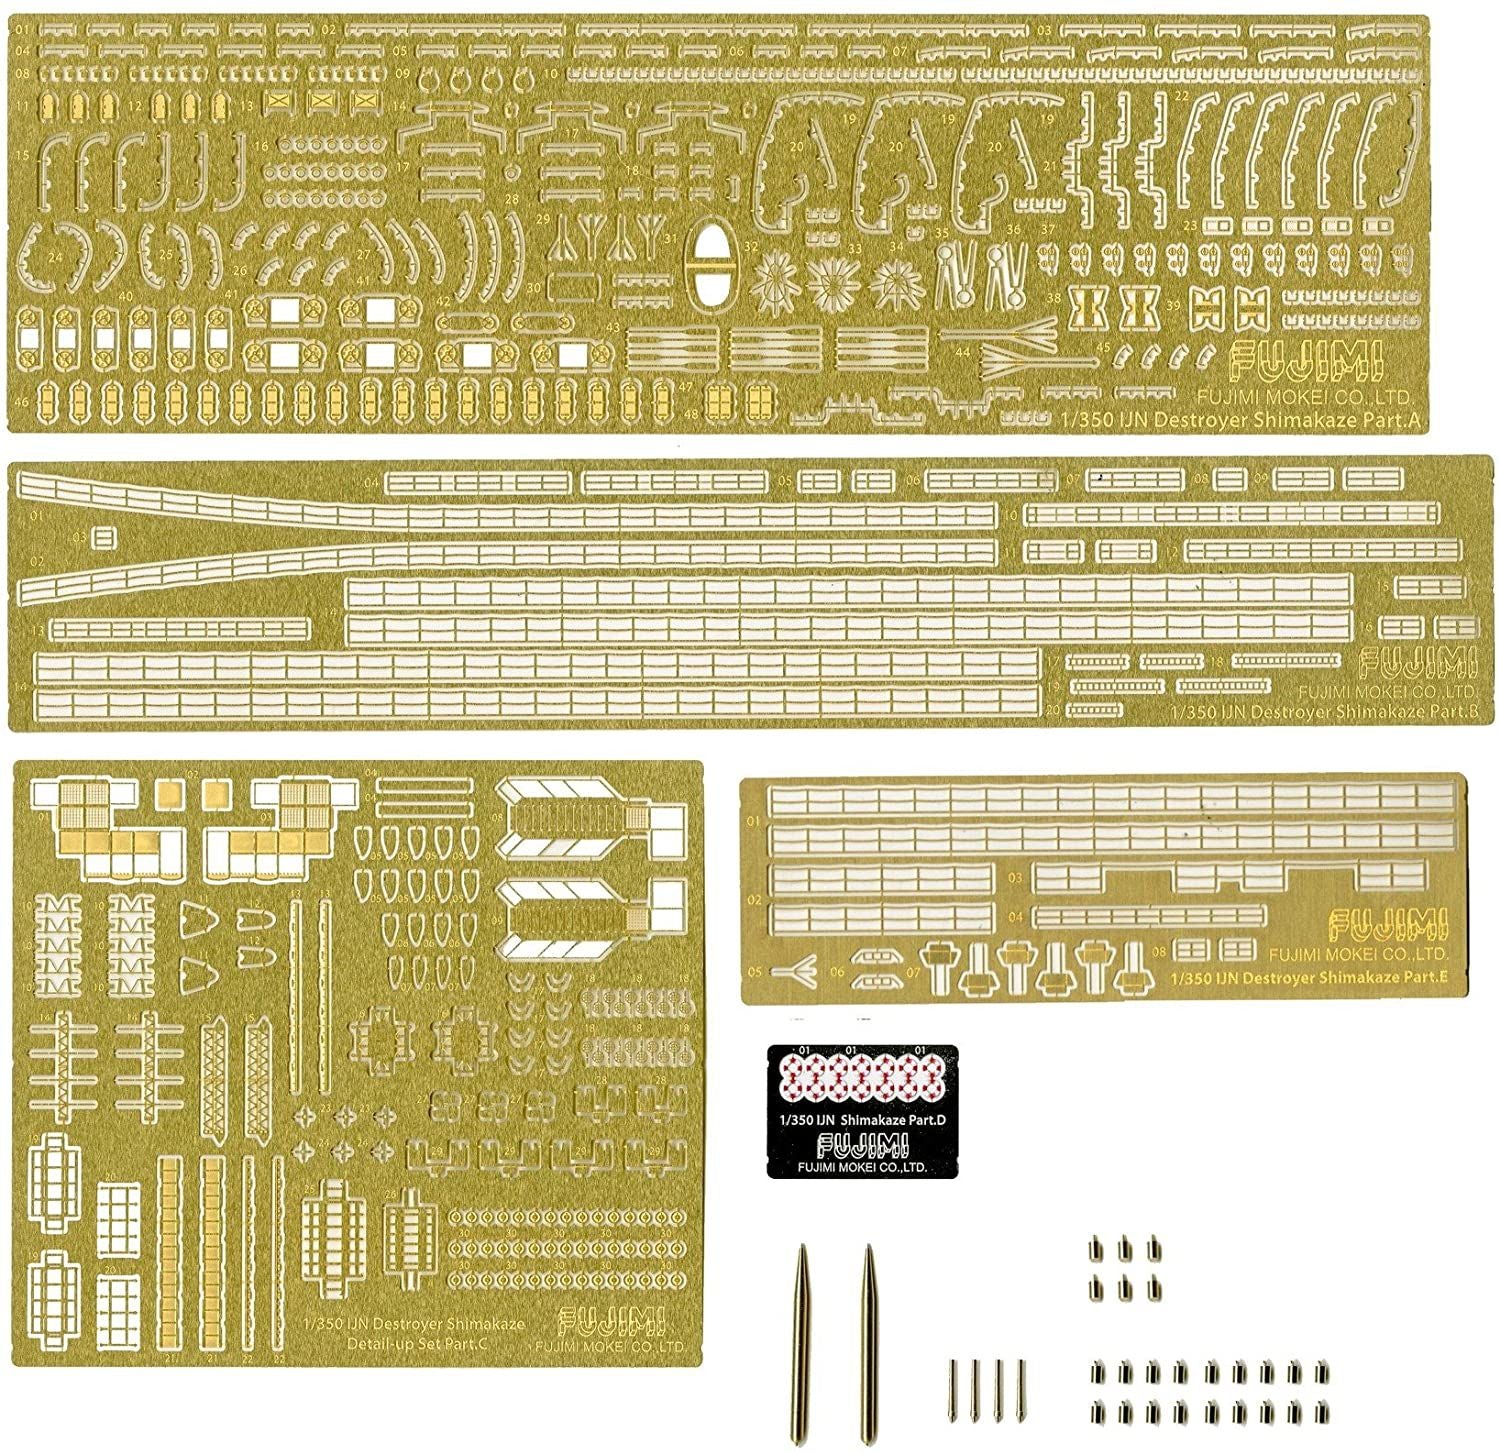 Fujimi Genuine Photo-Etched Parts for Fune Next Shimakaze Early Version - BanzaiHobby